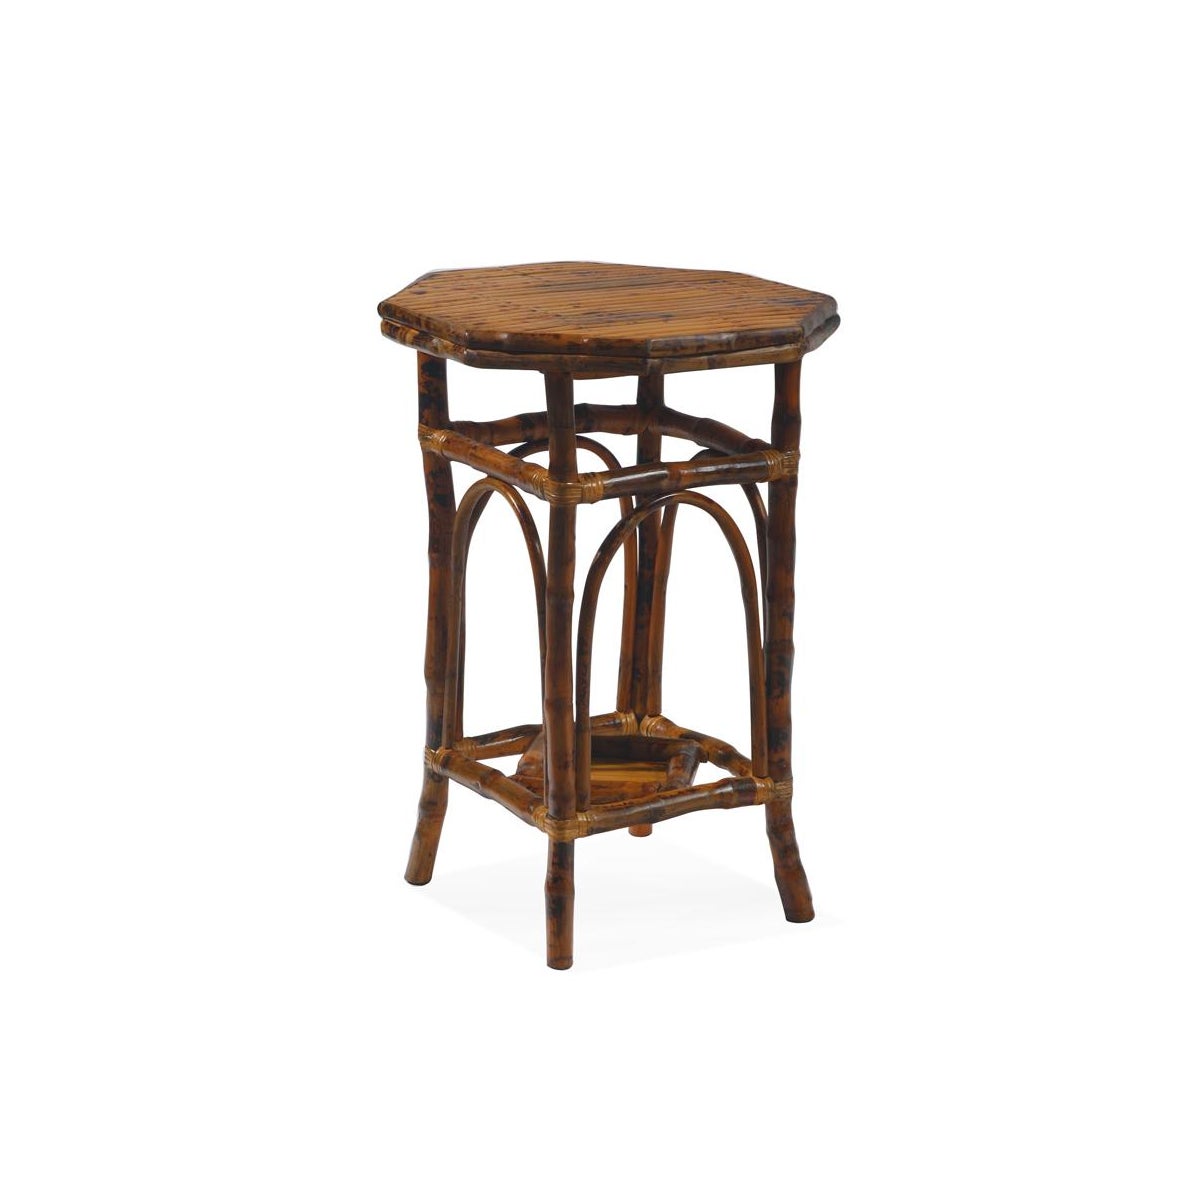 Octagon Side Table Finish - Antique Tortoise